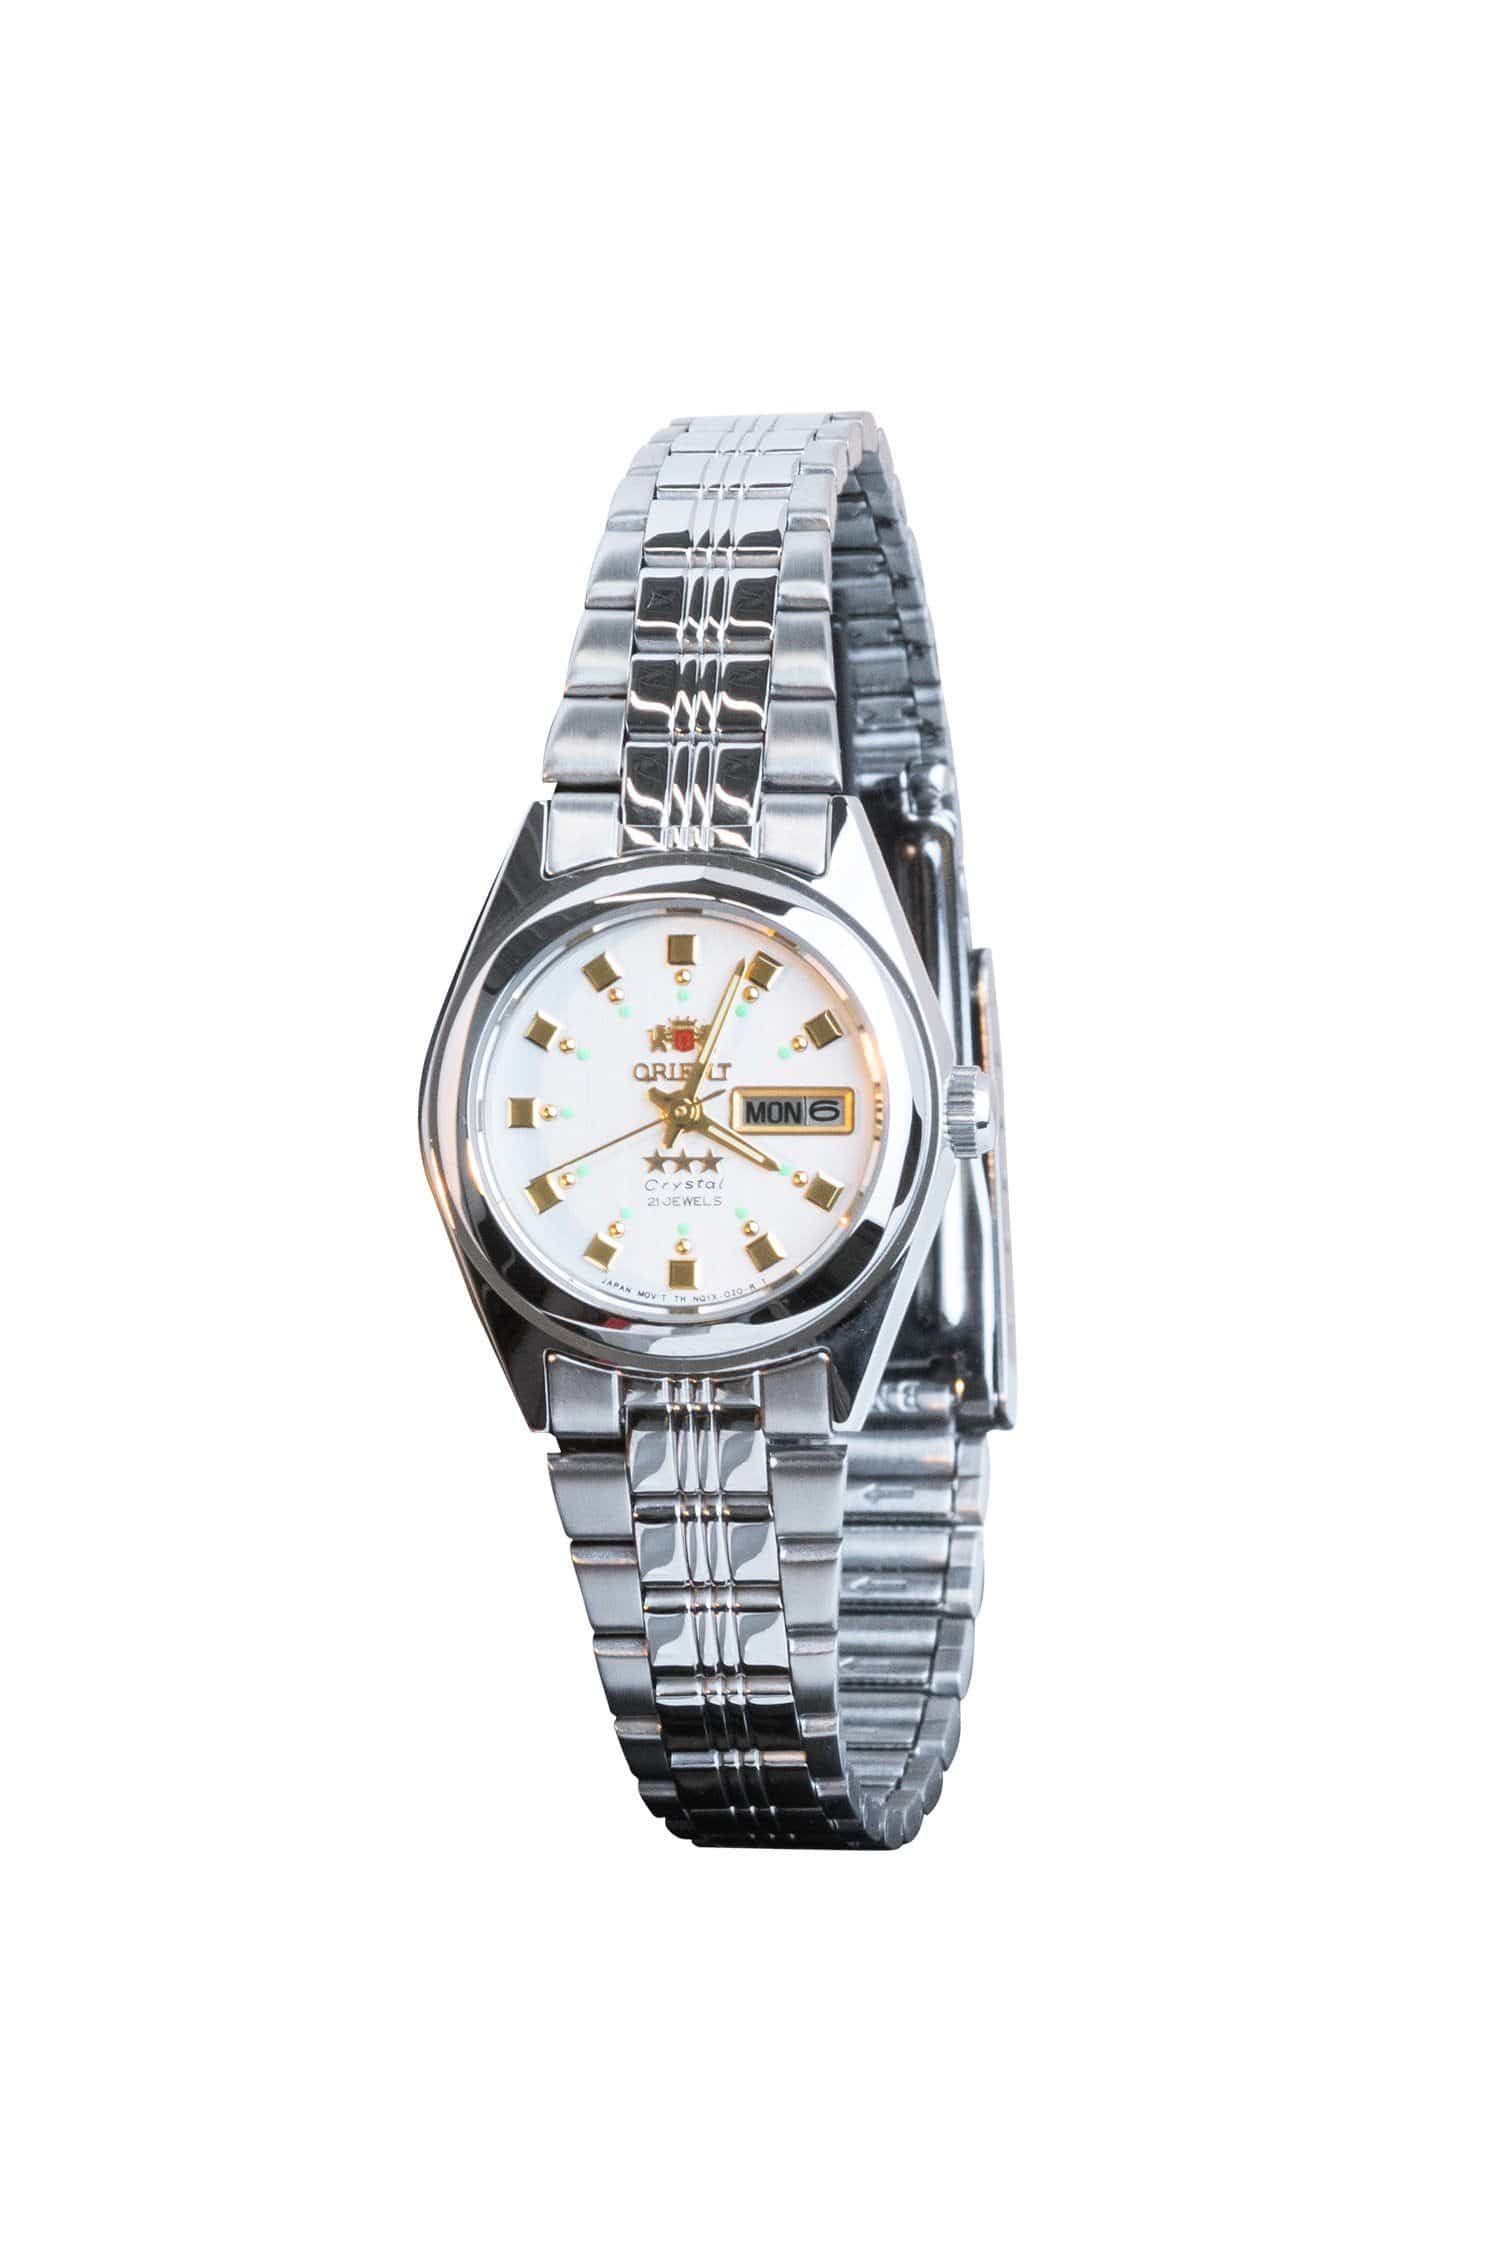 ORIENT AUTOMATIC CLASSIC 3 STAR WATCH